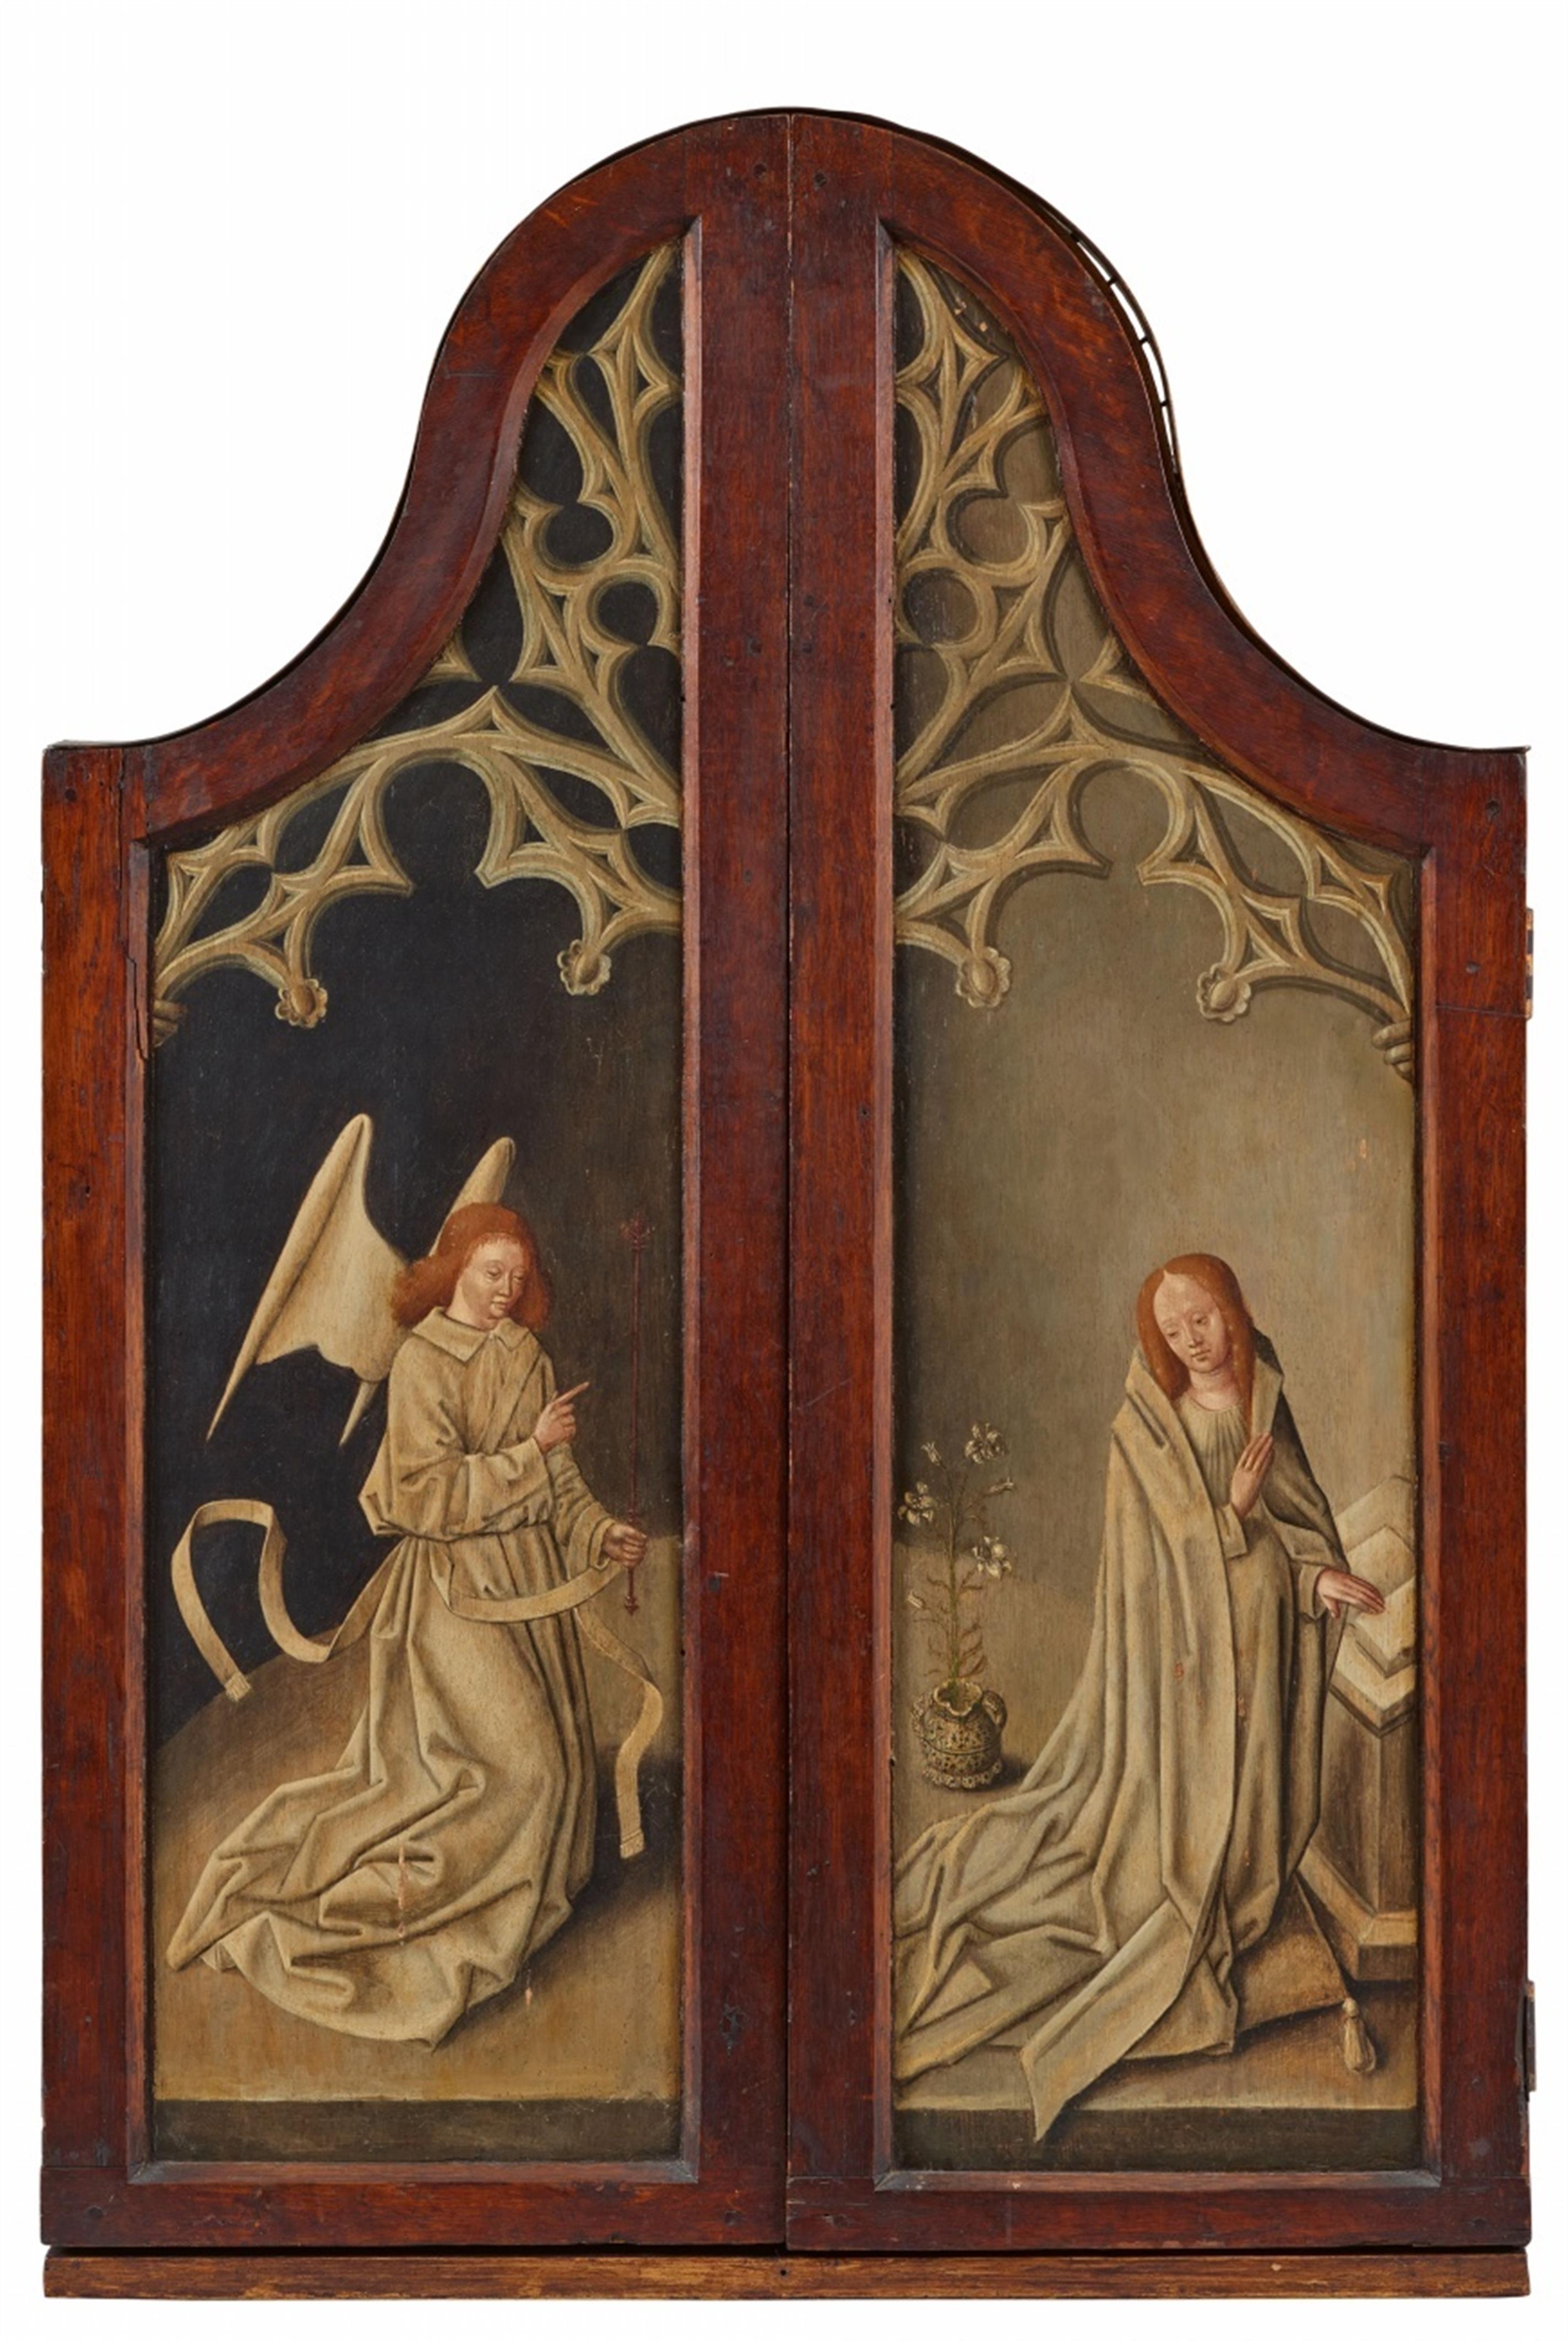 Bruges School around 1500 - Triptych with the Crucifixion, John the Baptist and St. Barbara - image-2